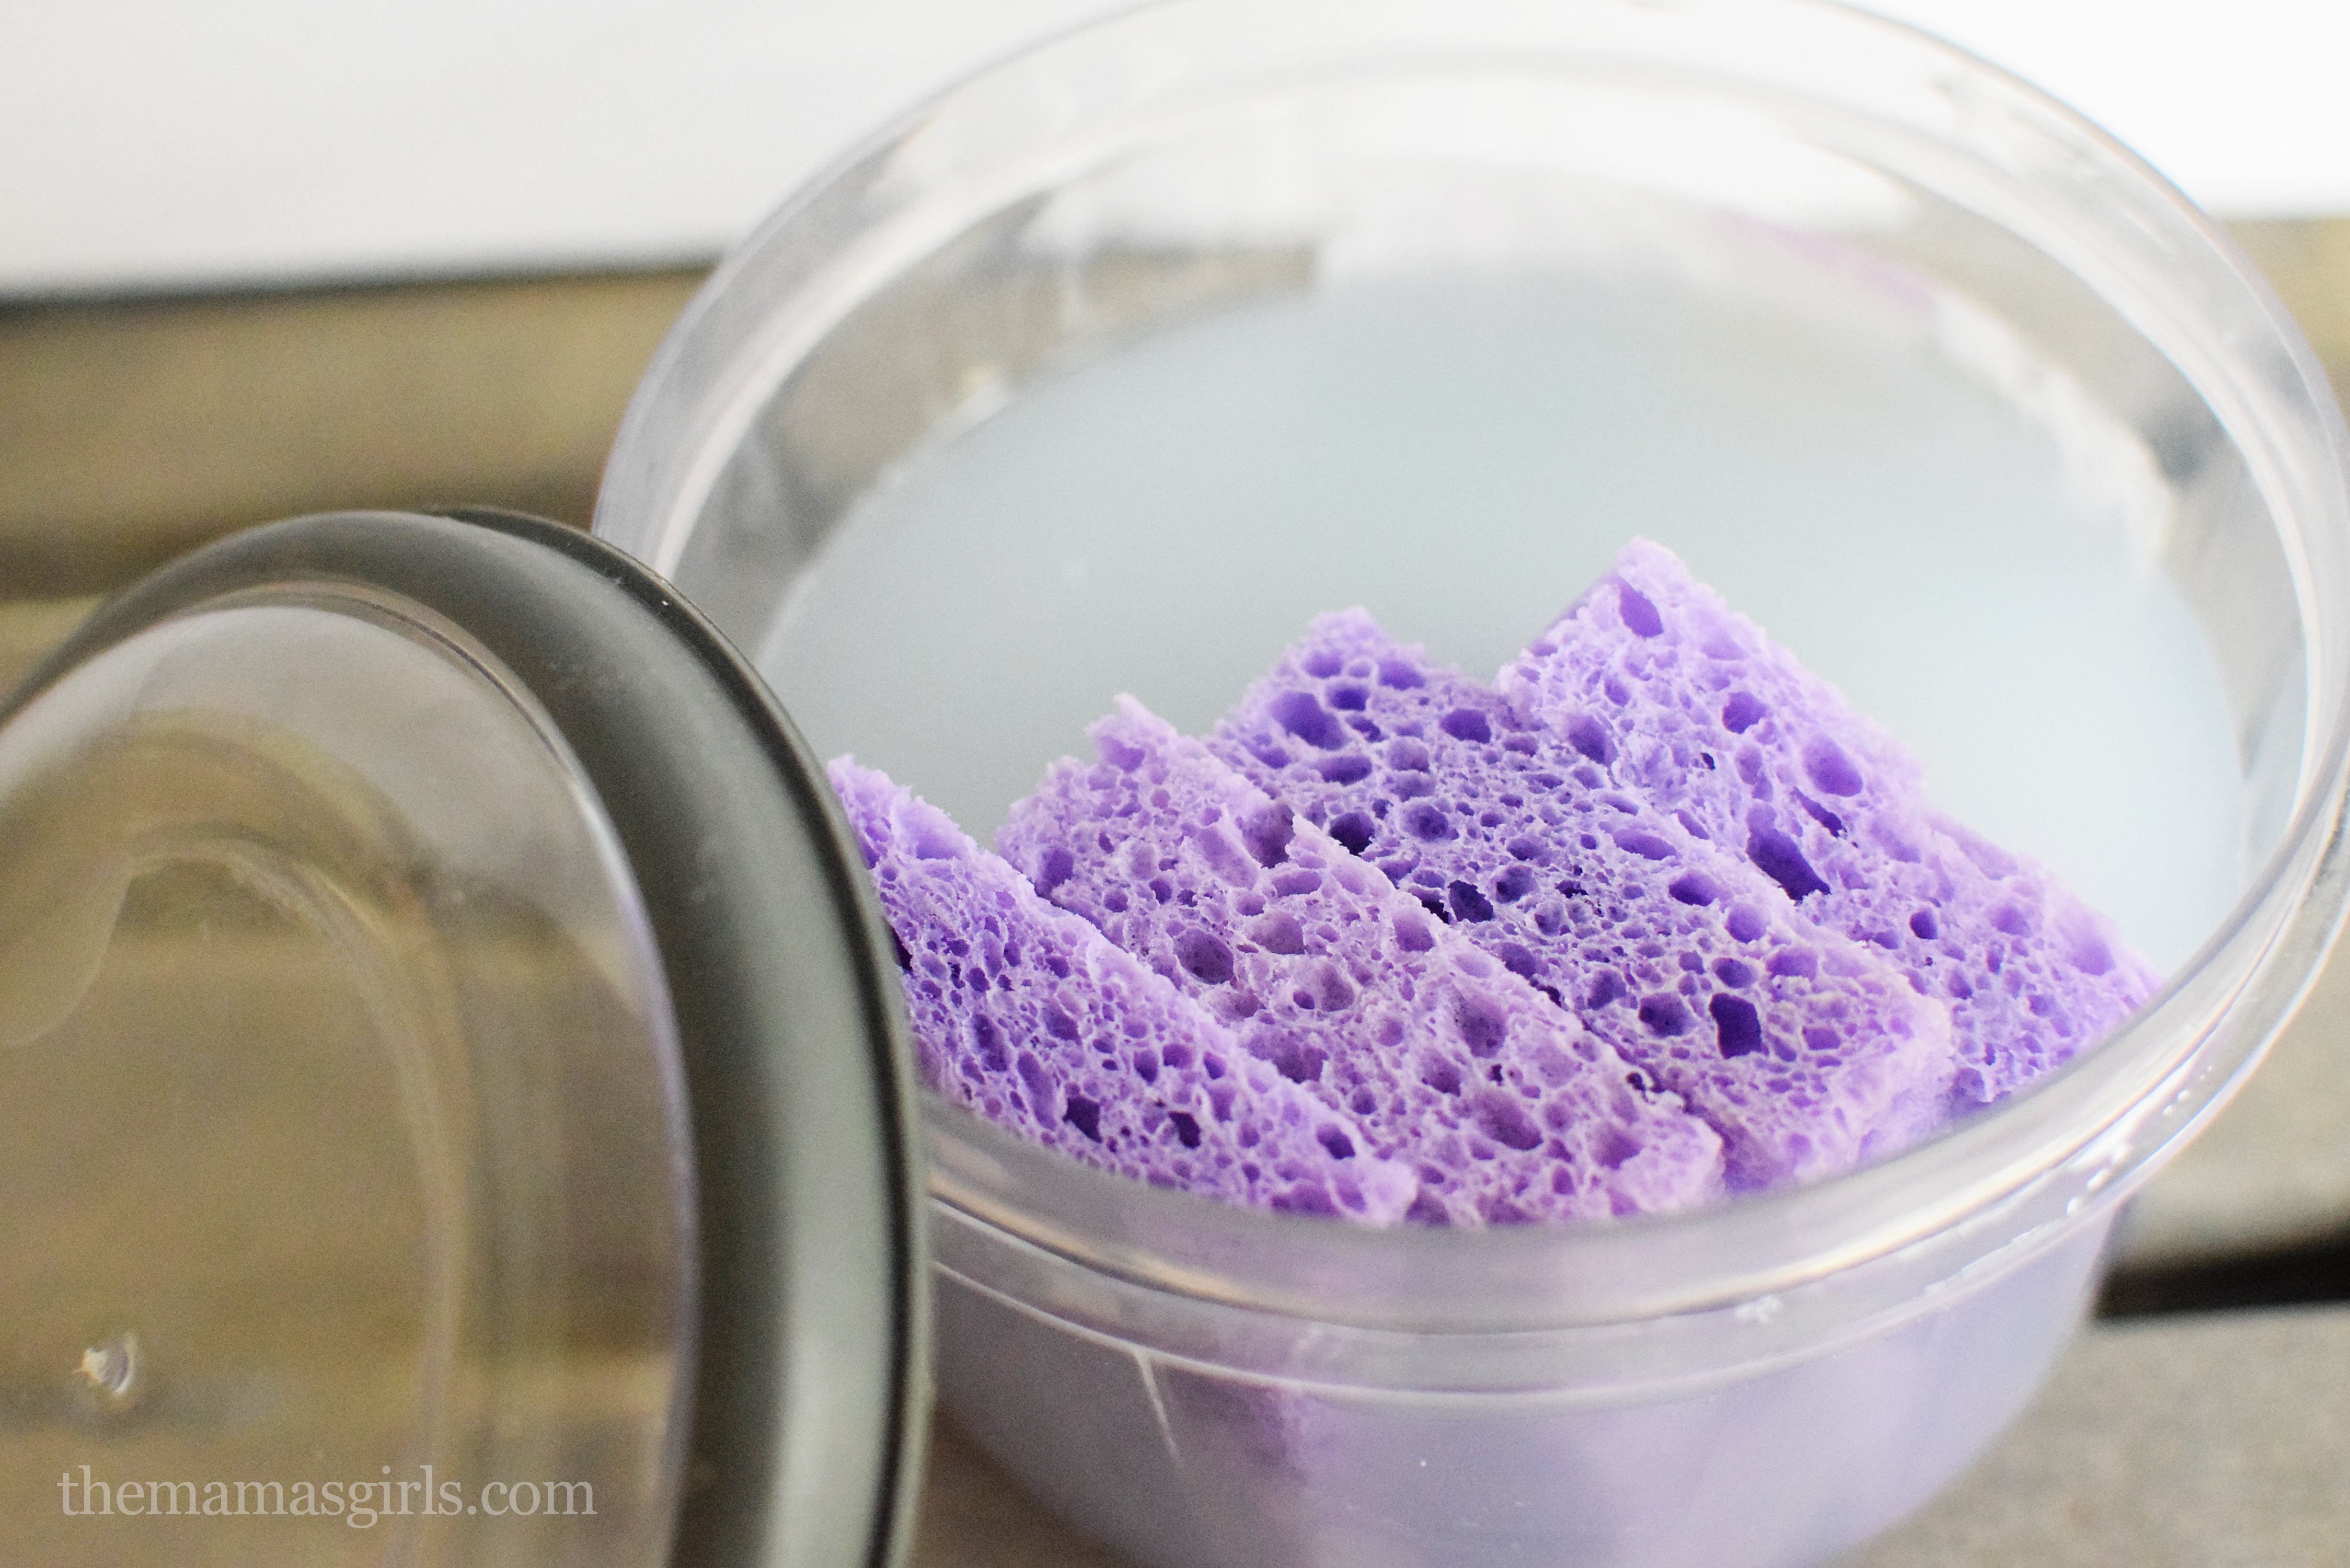 Dryer Sheets with Fabric Softener DIY